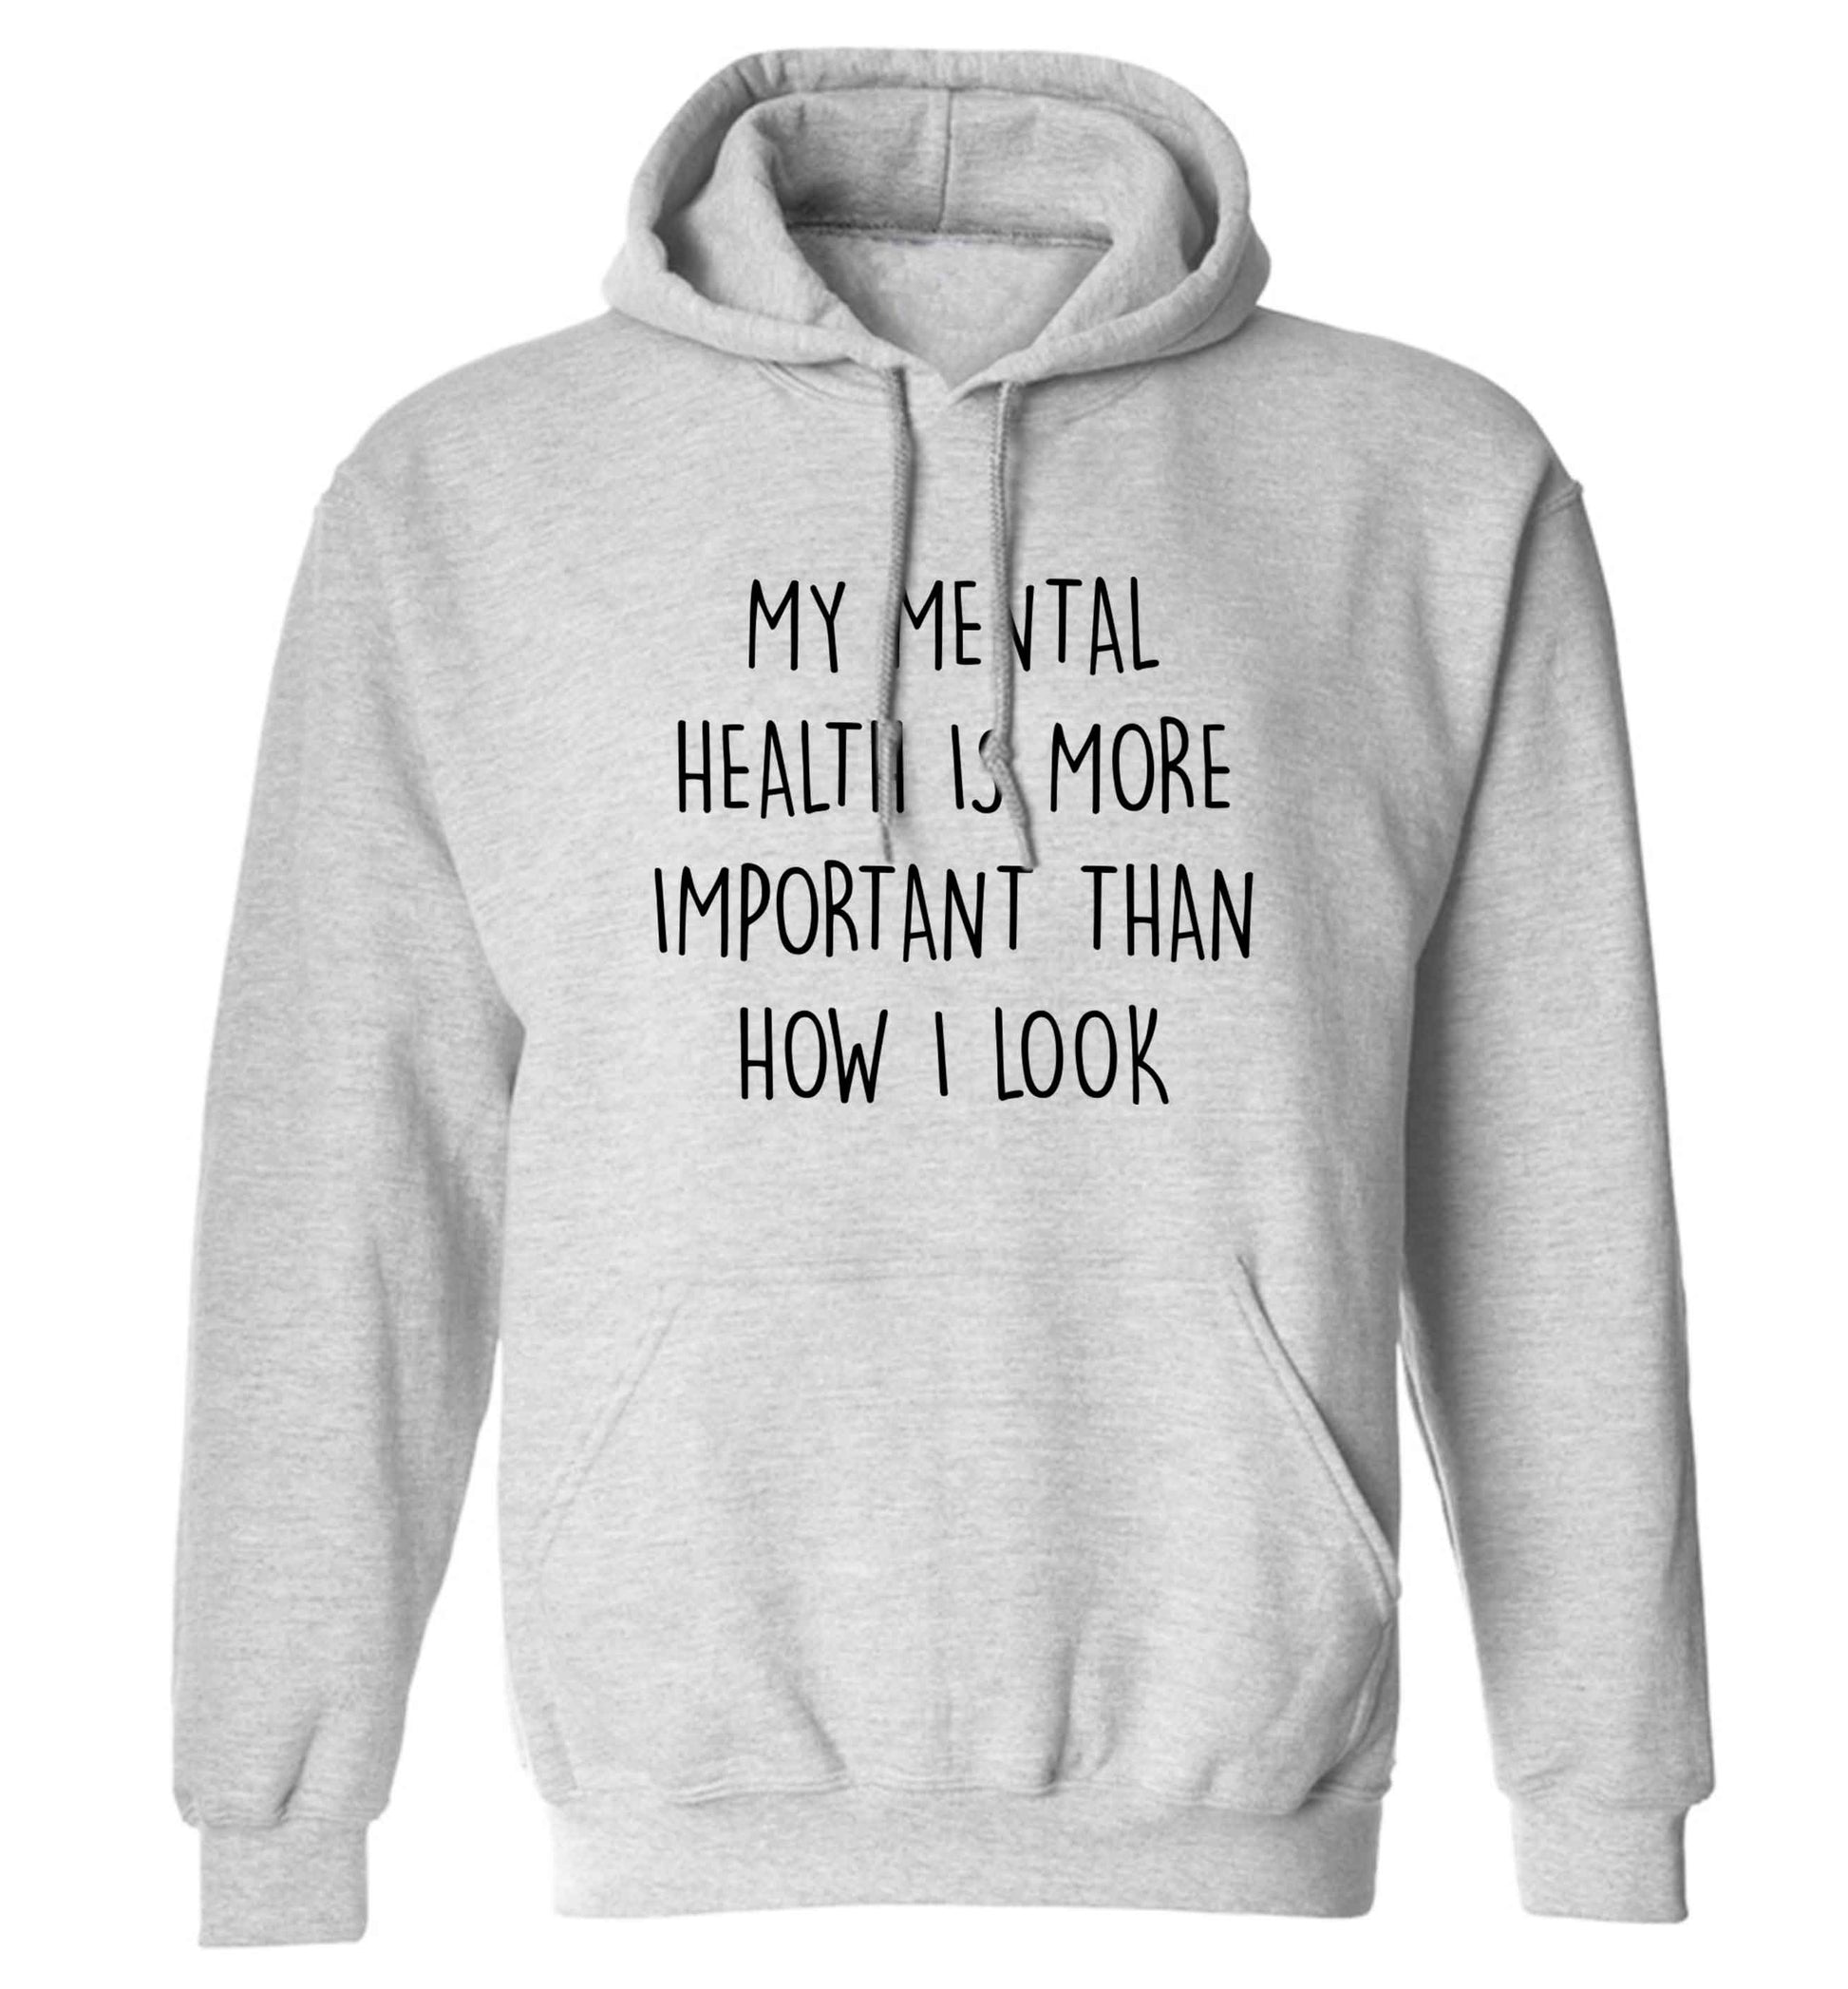 My mental health is more importnat than how I look adults unisex grey hoodie 2XL